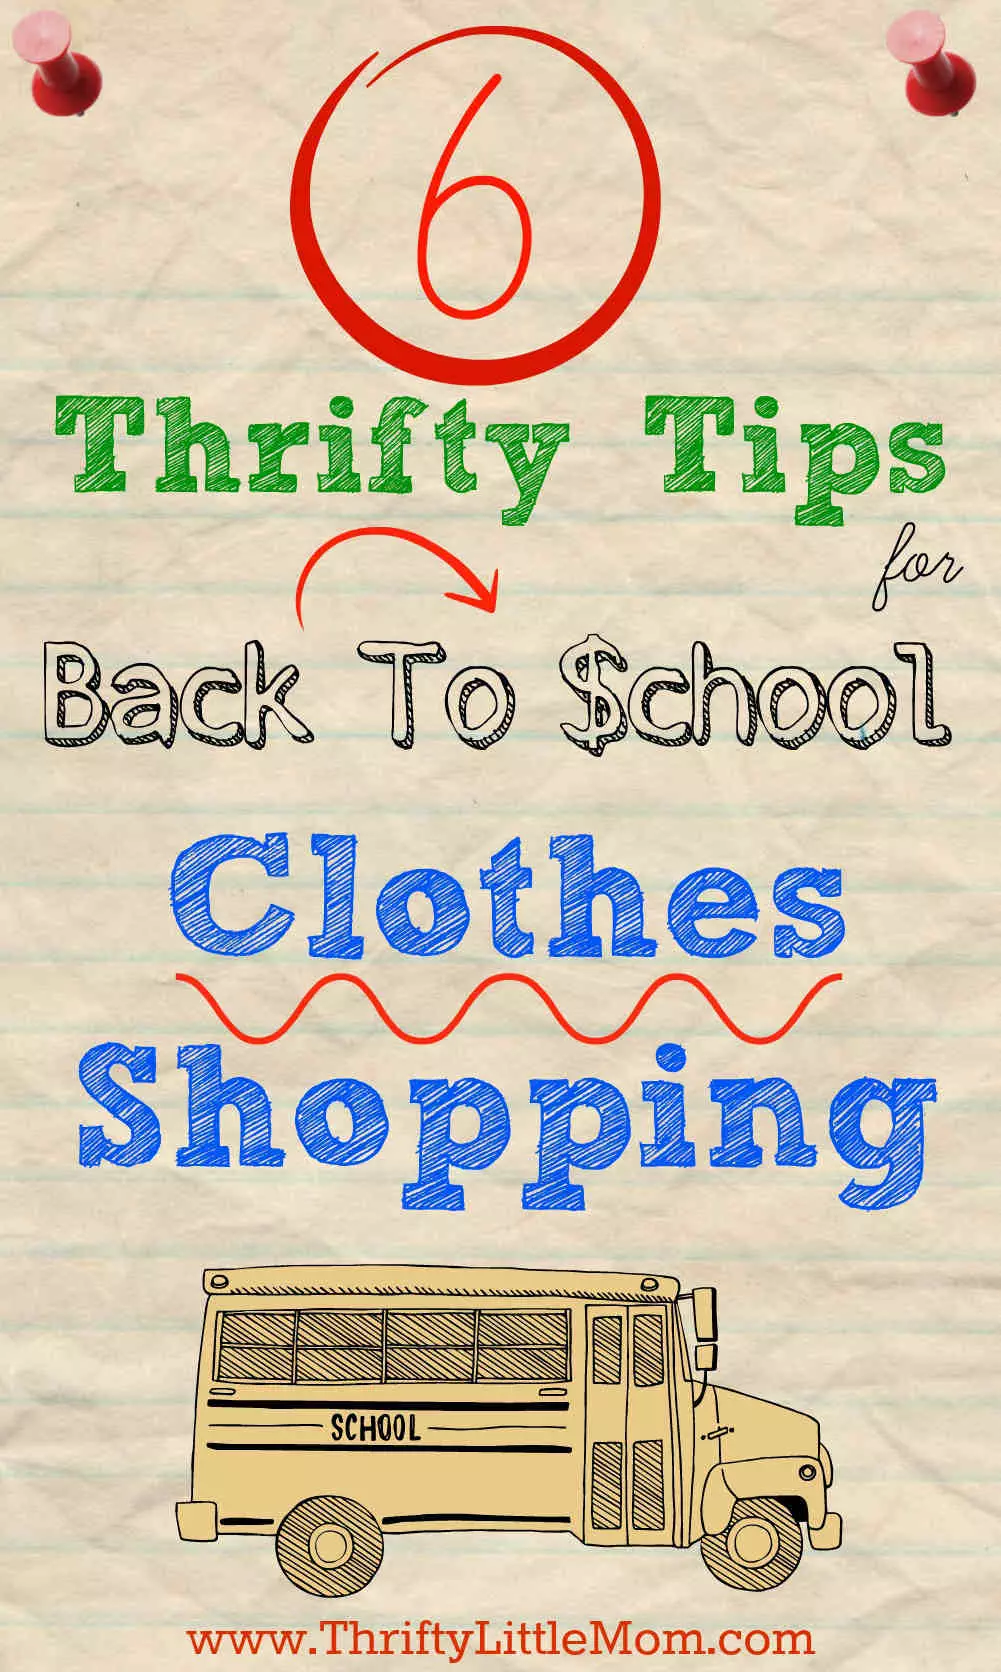 6 Thrifty Tips for Back to School Clothes Shopping